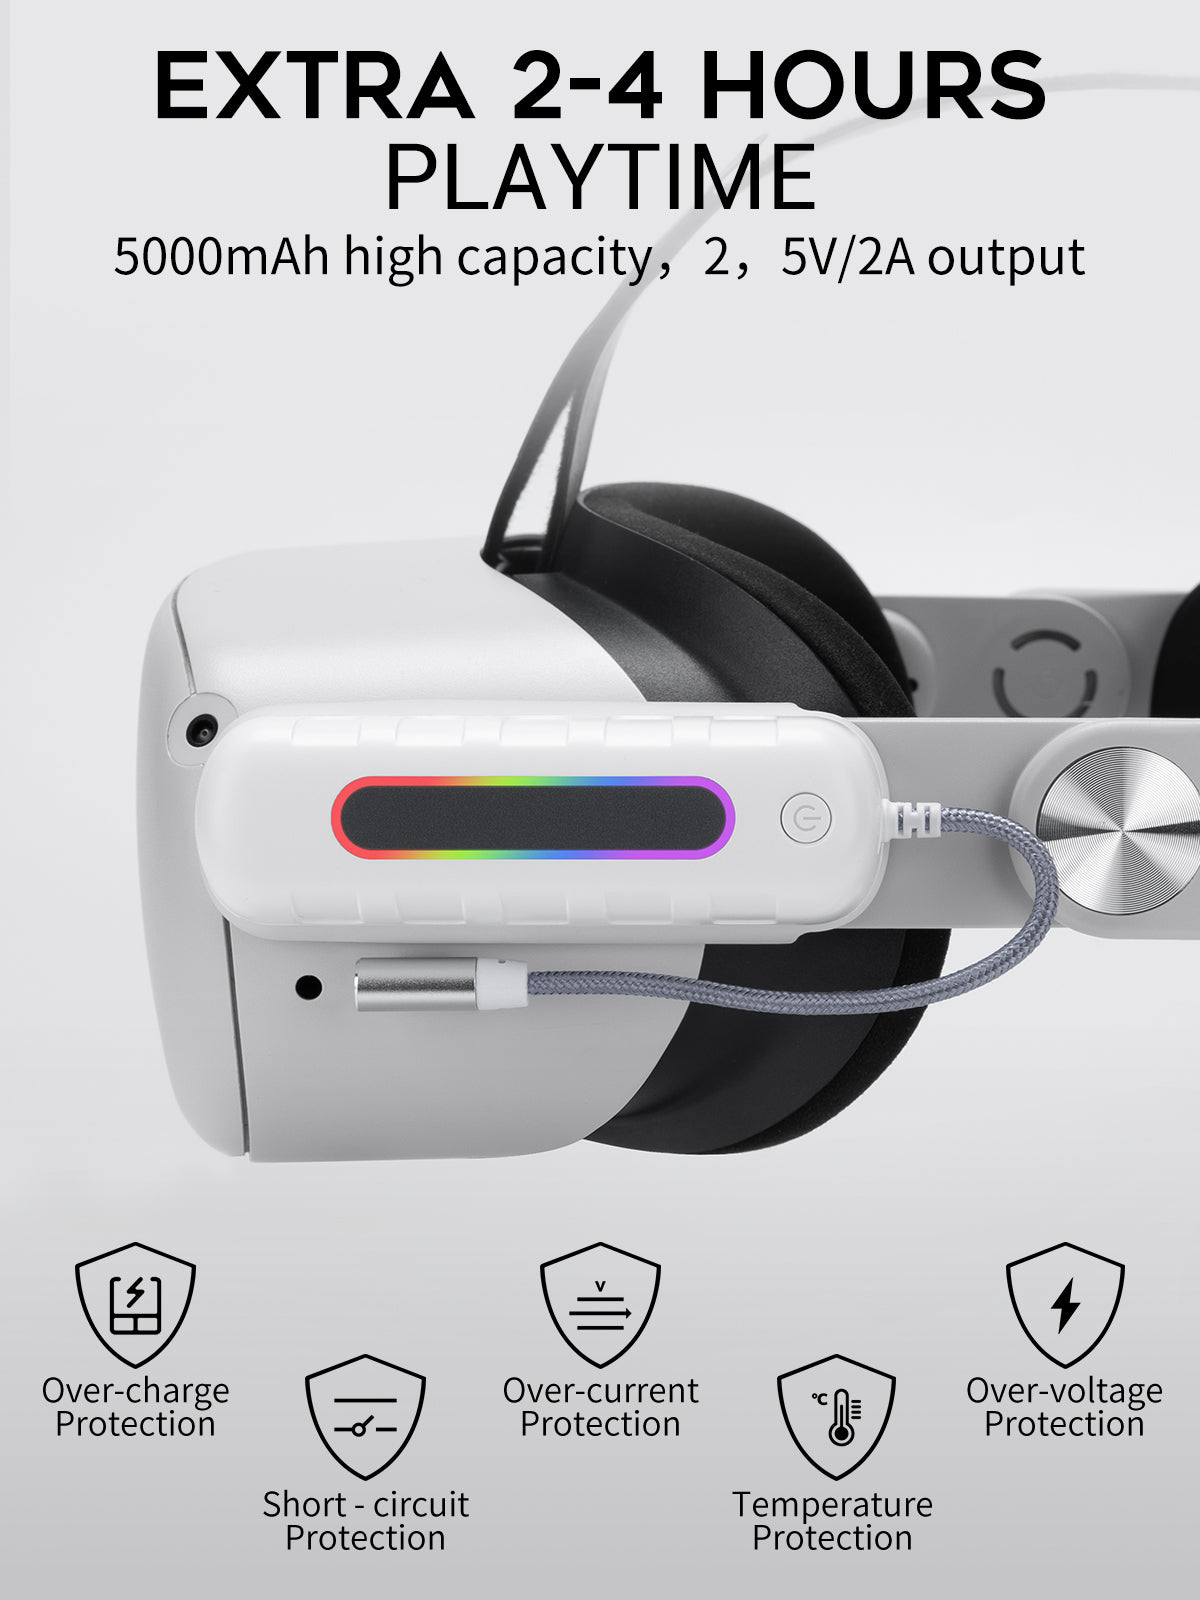  Battery Pack for Oculus Quest 2, Accessories for